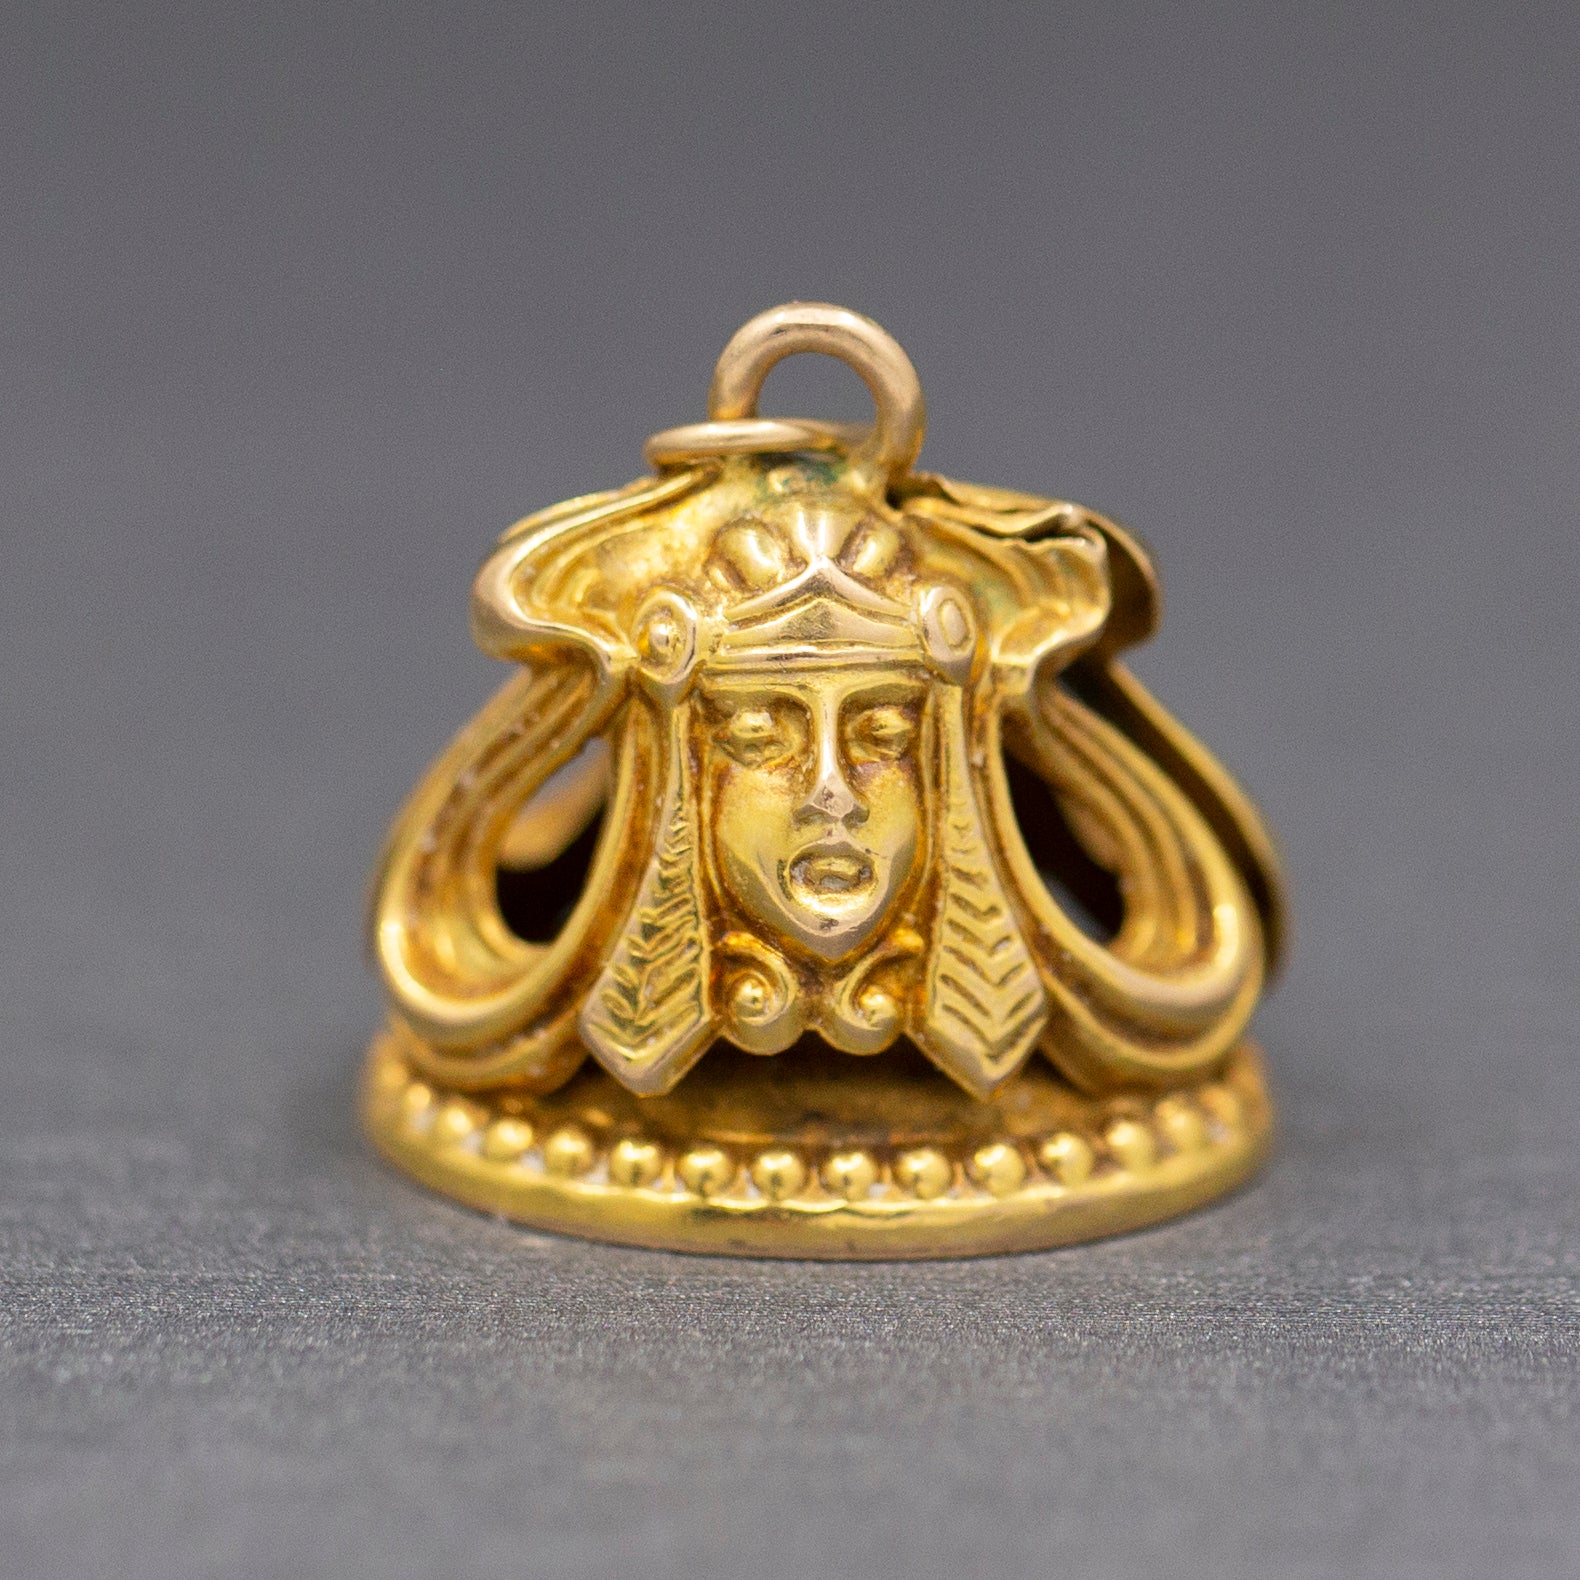 Antique Art Nouveau Egyptian Revival Watch Fob in 14k Yellow Gold